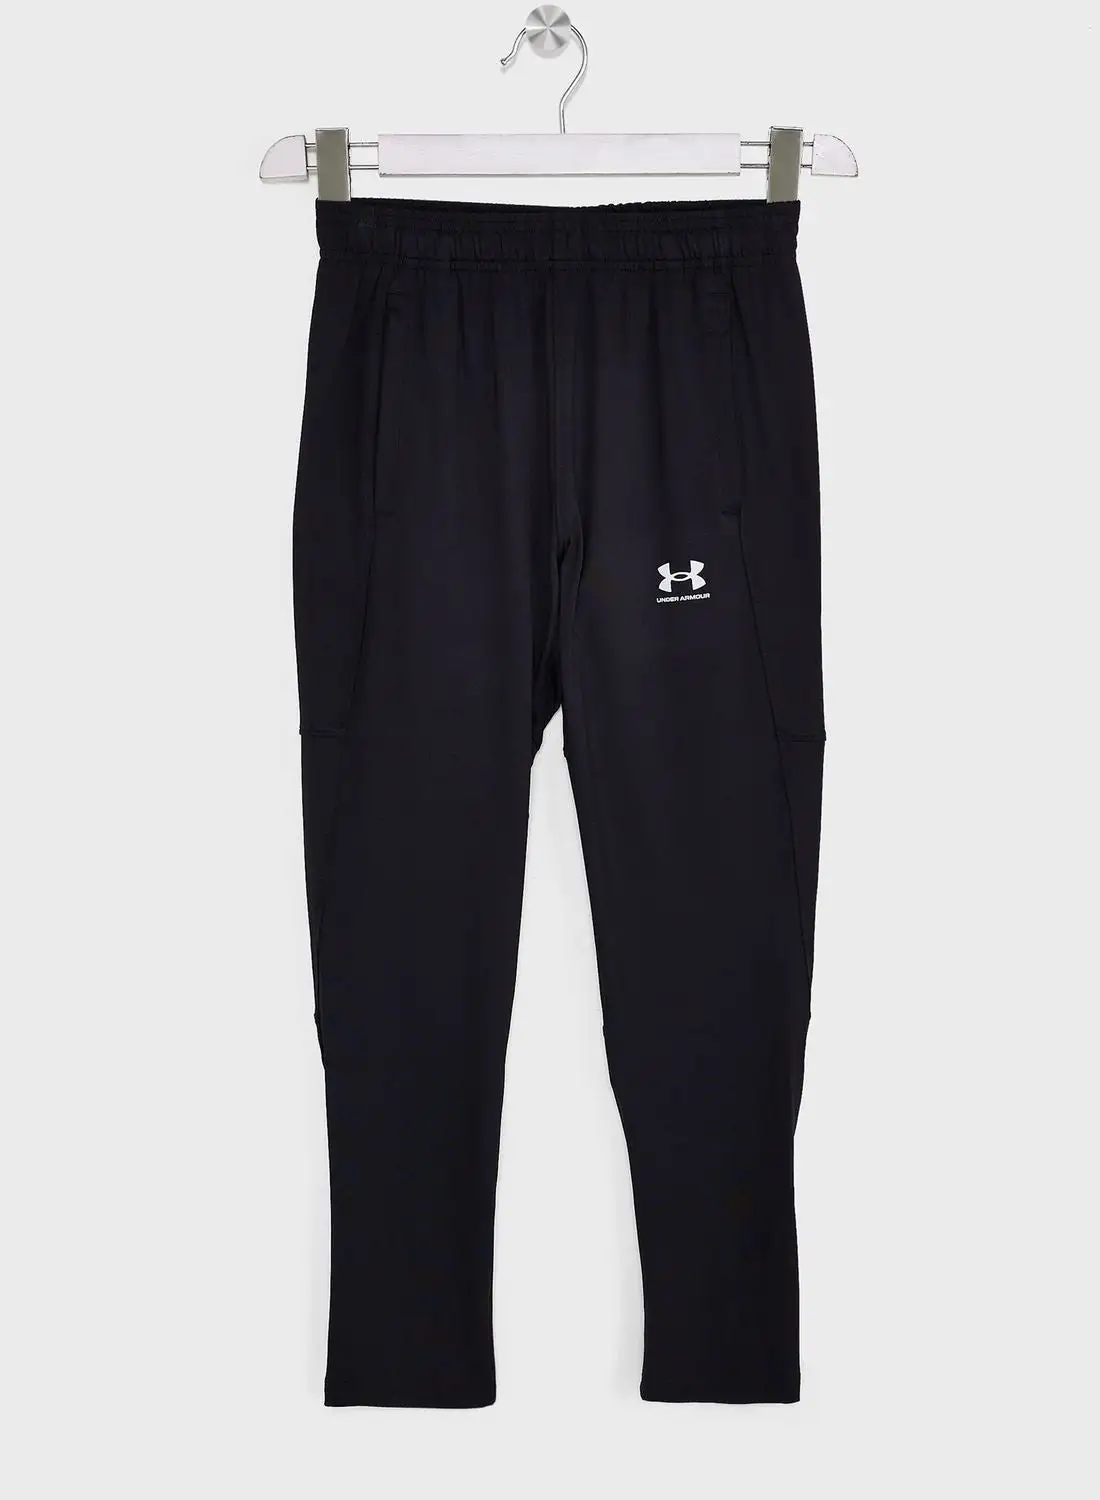 UNDER ARMOUR Boys' Challenger Training Pants